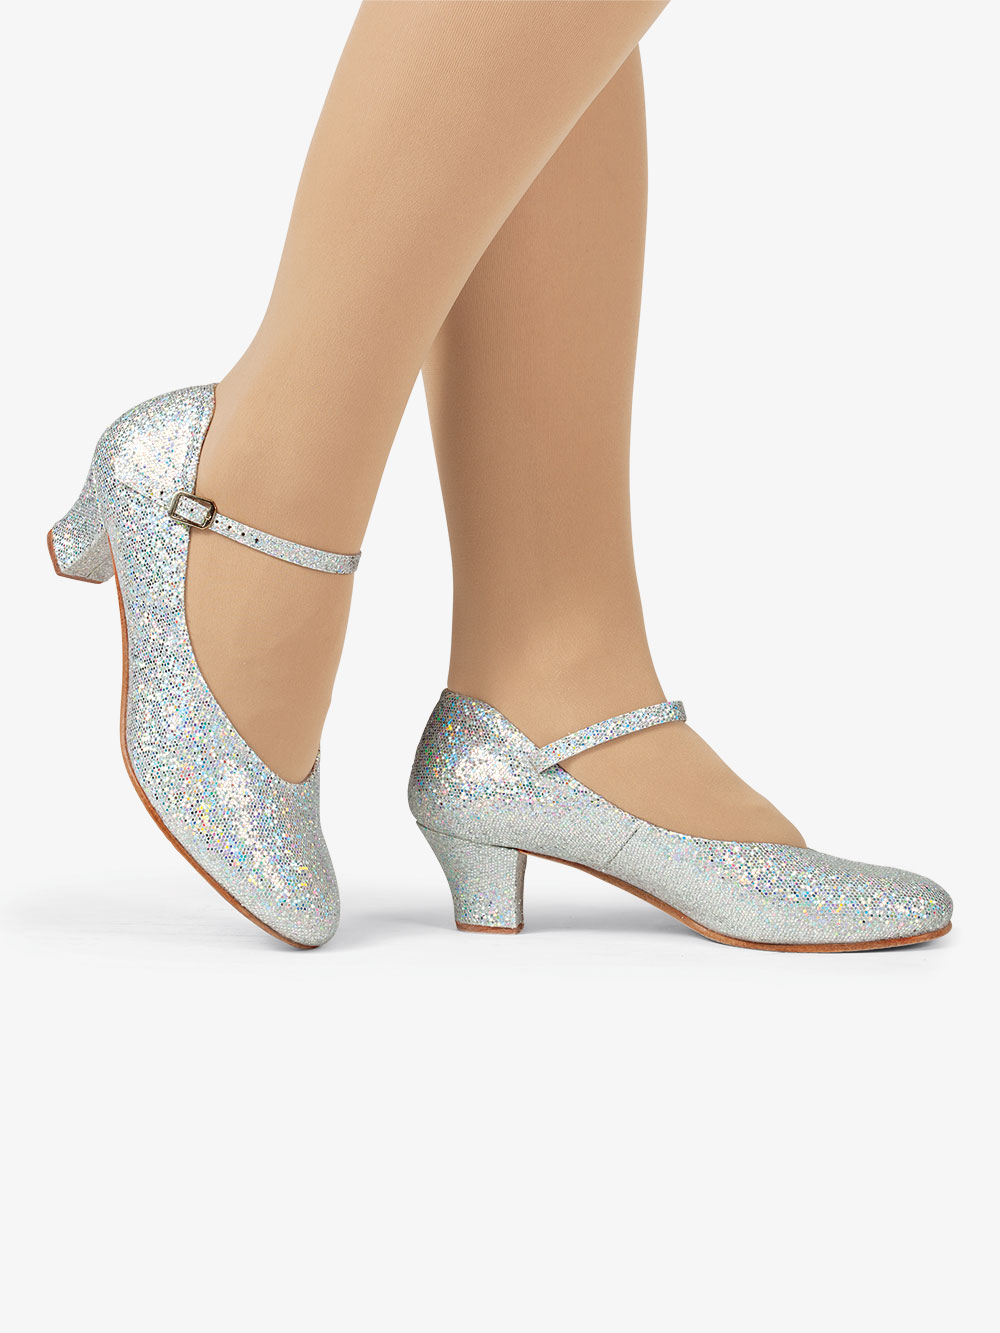 silver character shoes